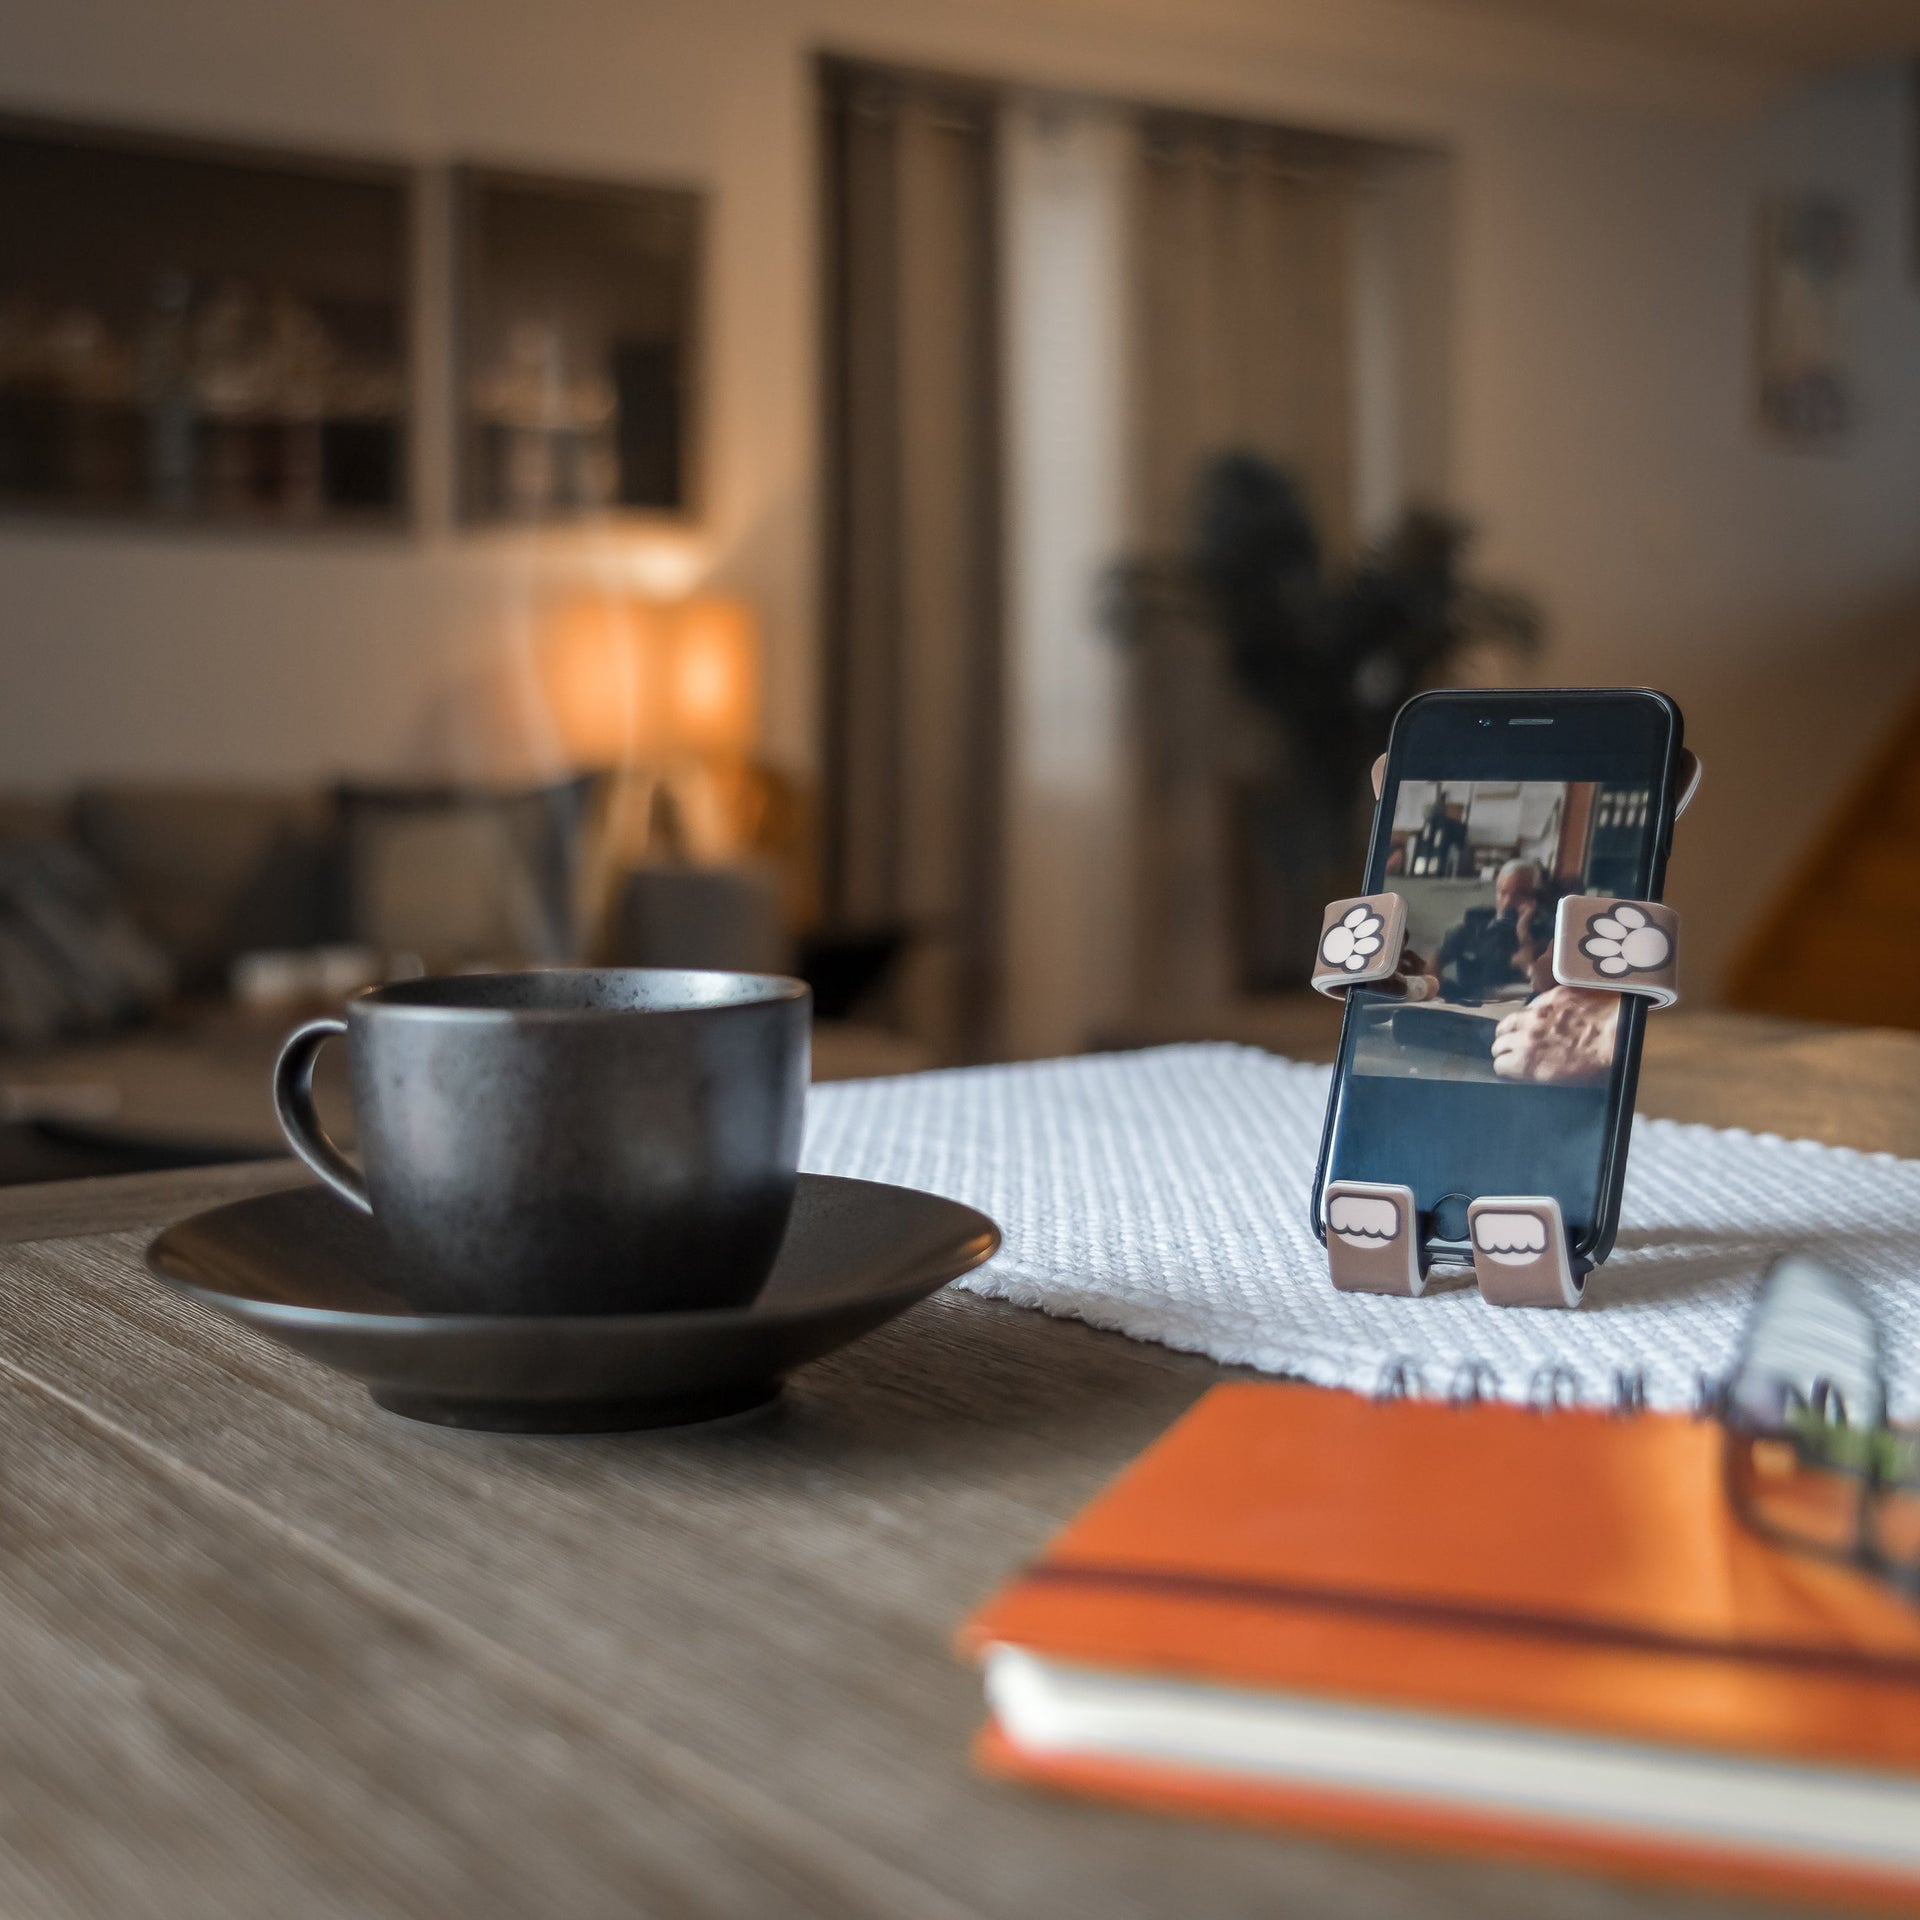 Image of Pug the dog Hug Buddy holding a cell phone while sitting on a kitchen table beside a hot cup of coffee